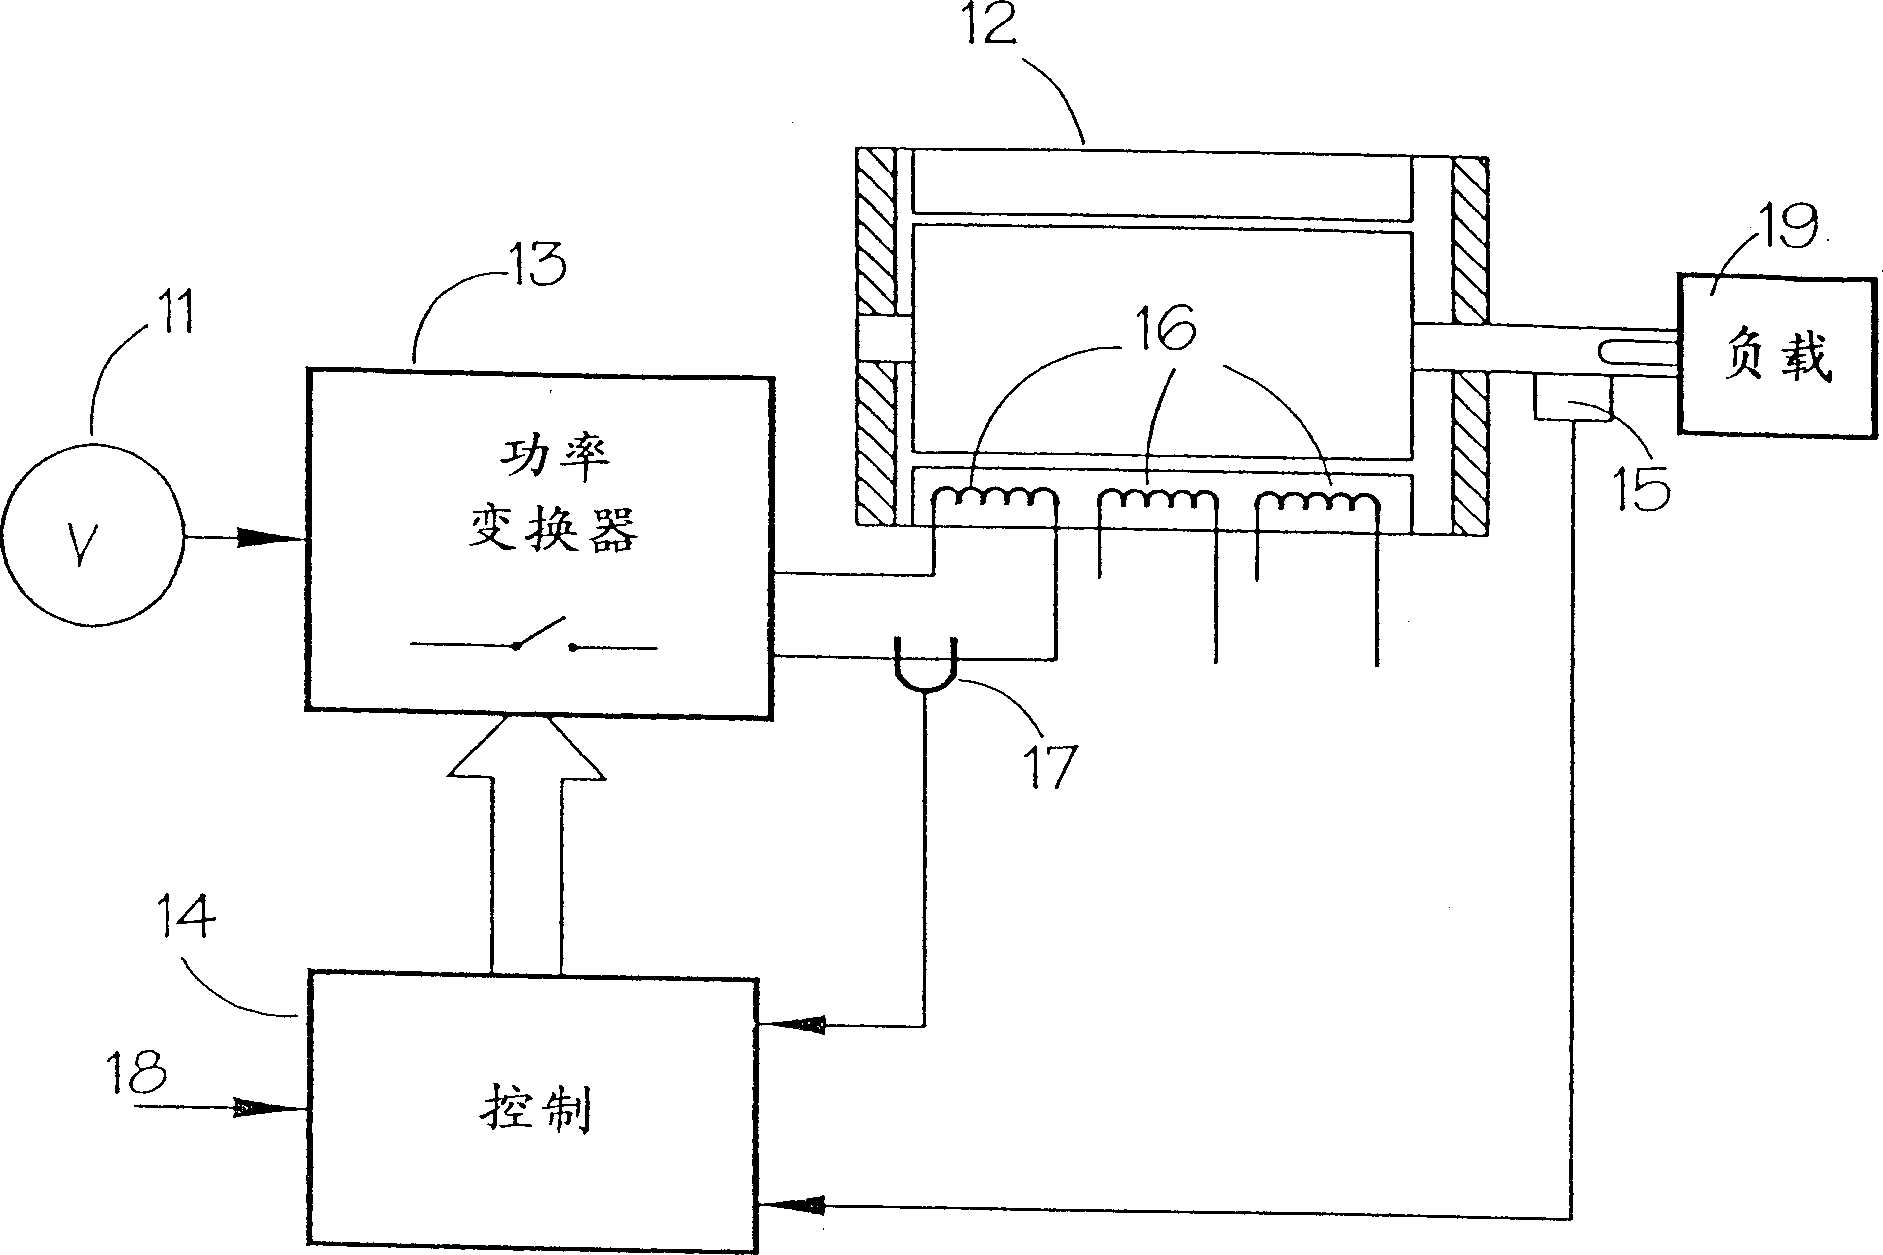 Control strategy of switch magnetic resistance driving system